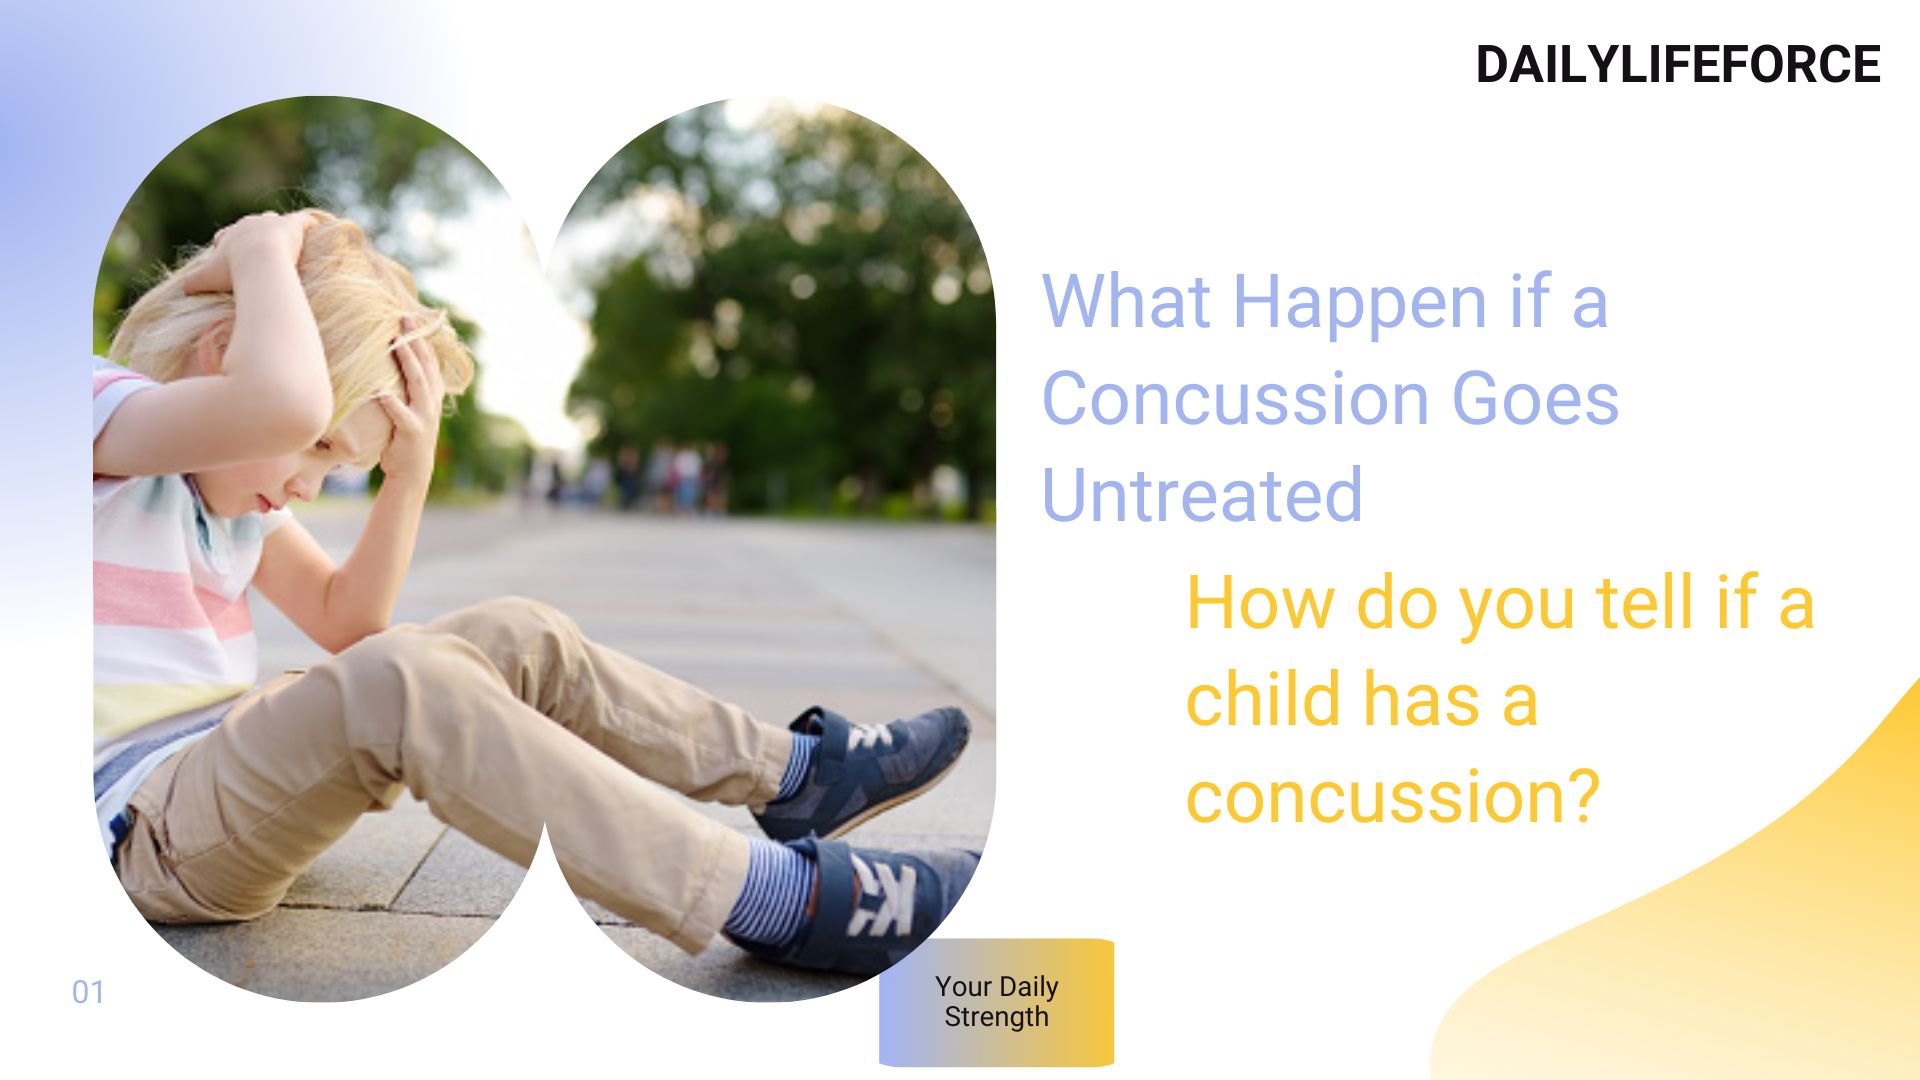 How do you tell if a child has a concussion?